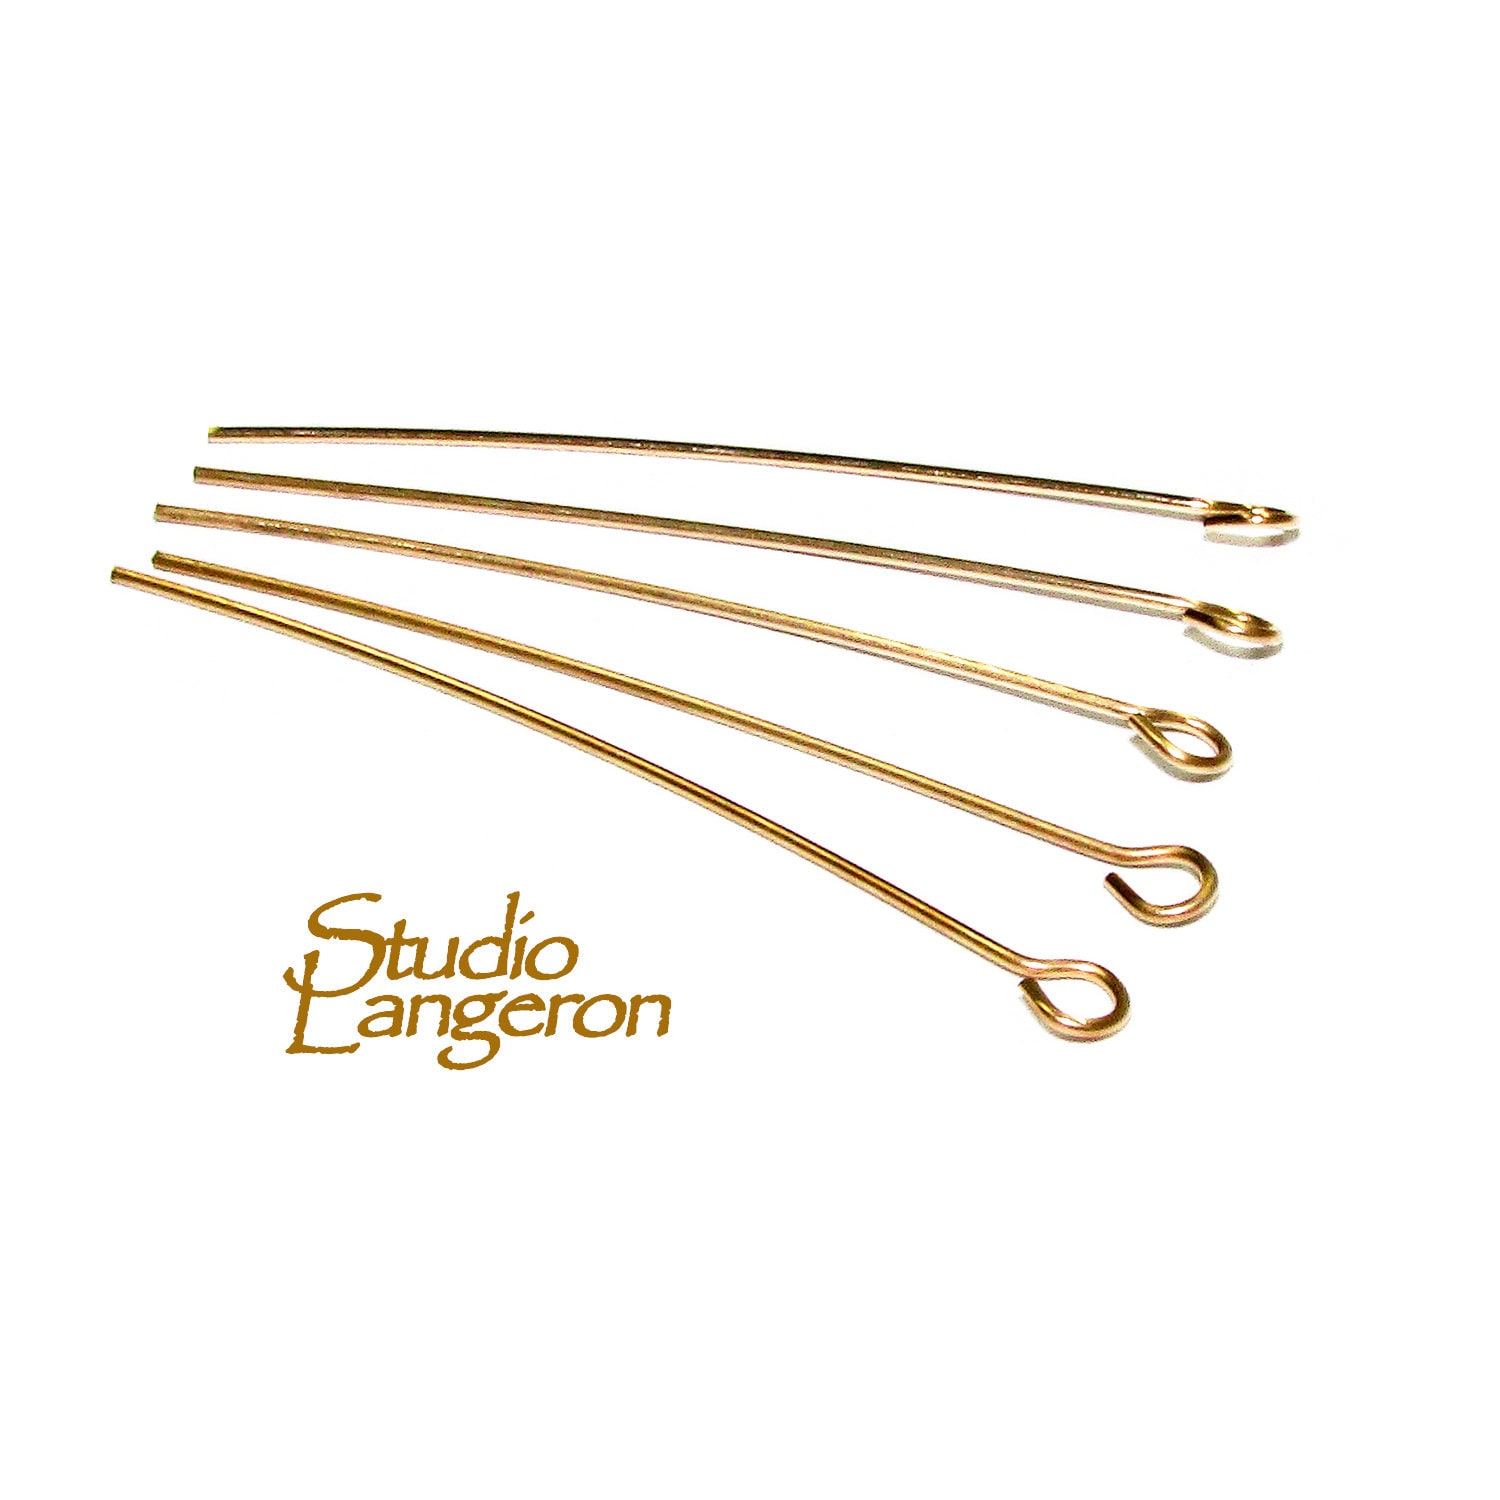 Gold Eye Pin Silver Rose Gold Black Open Eyepins Headpins 0.7mm (21 Gauge)  by 20mm, 30mm, 35mm Jewelry Making Craft Supply DIY Finding L-537 L-538  L-549